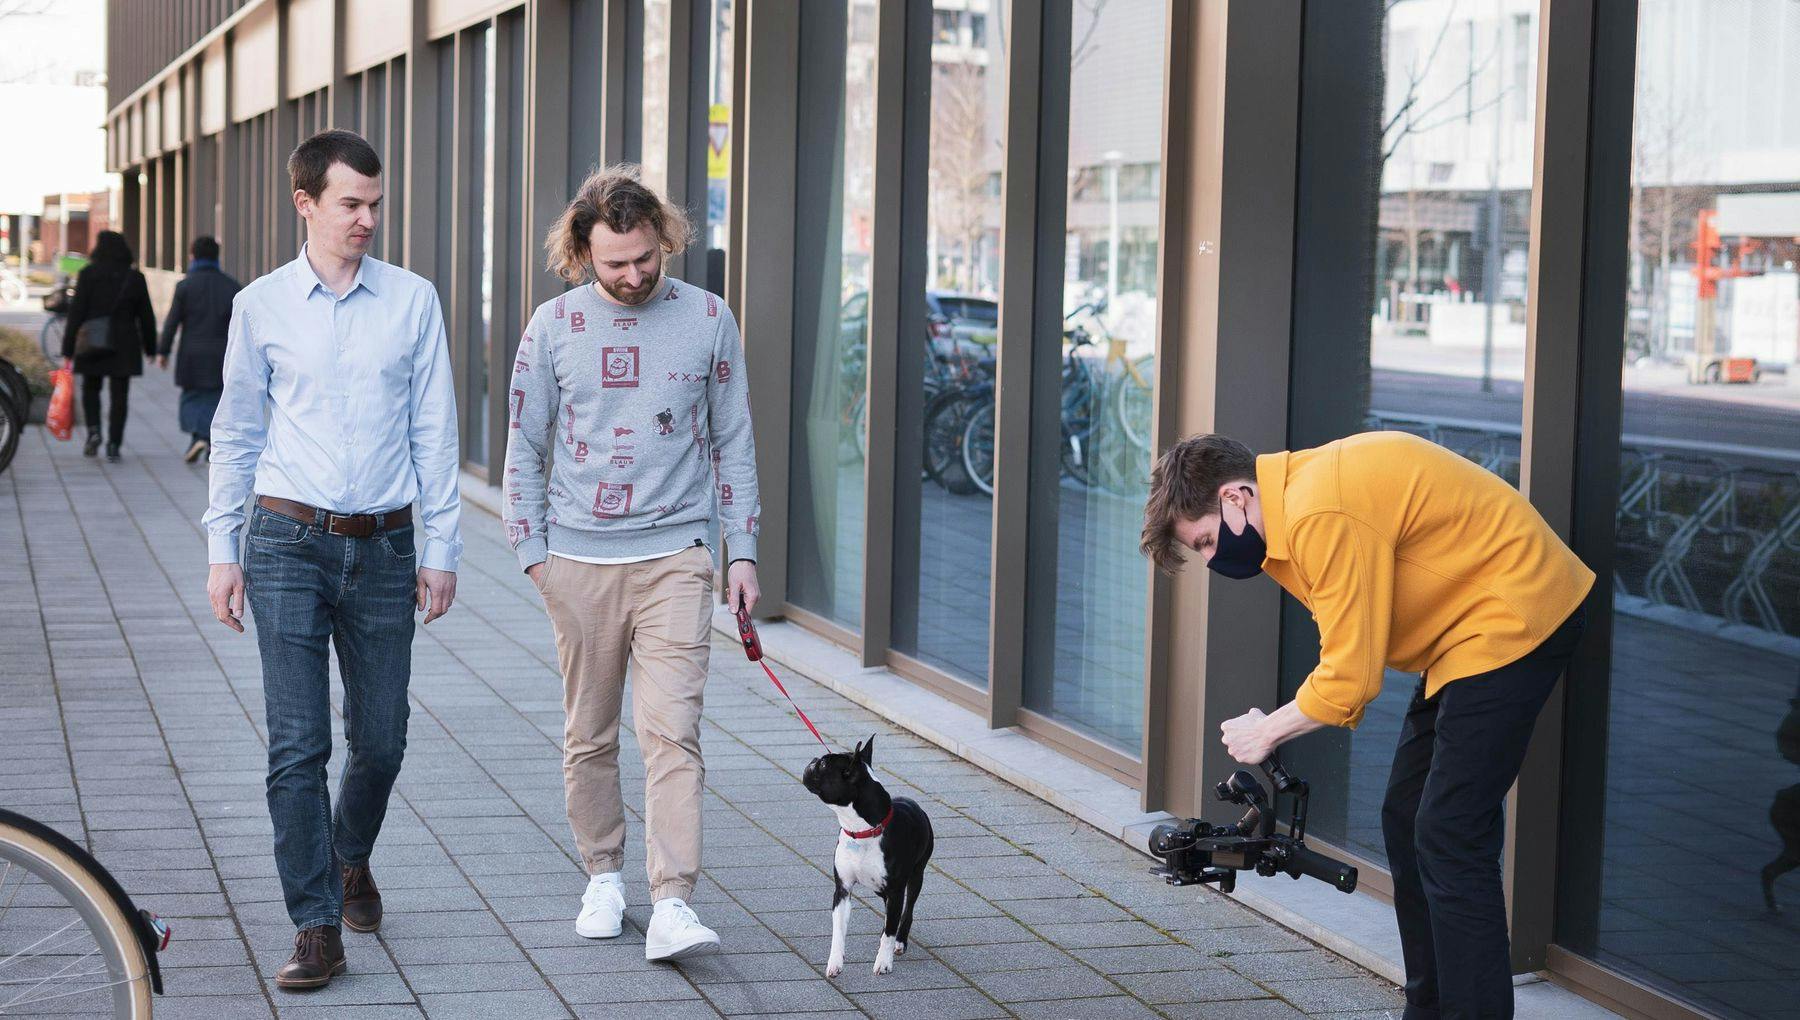 Cooper Pet Care co-founders Pavel Timofeev and Michael Fisher walking a dog in the street, with someone filming them.